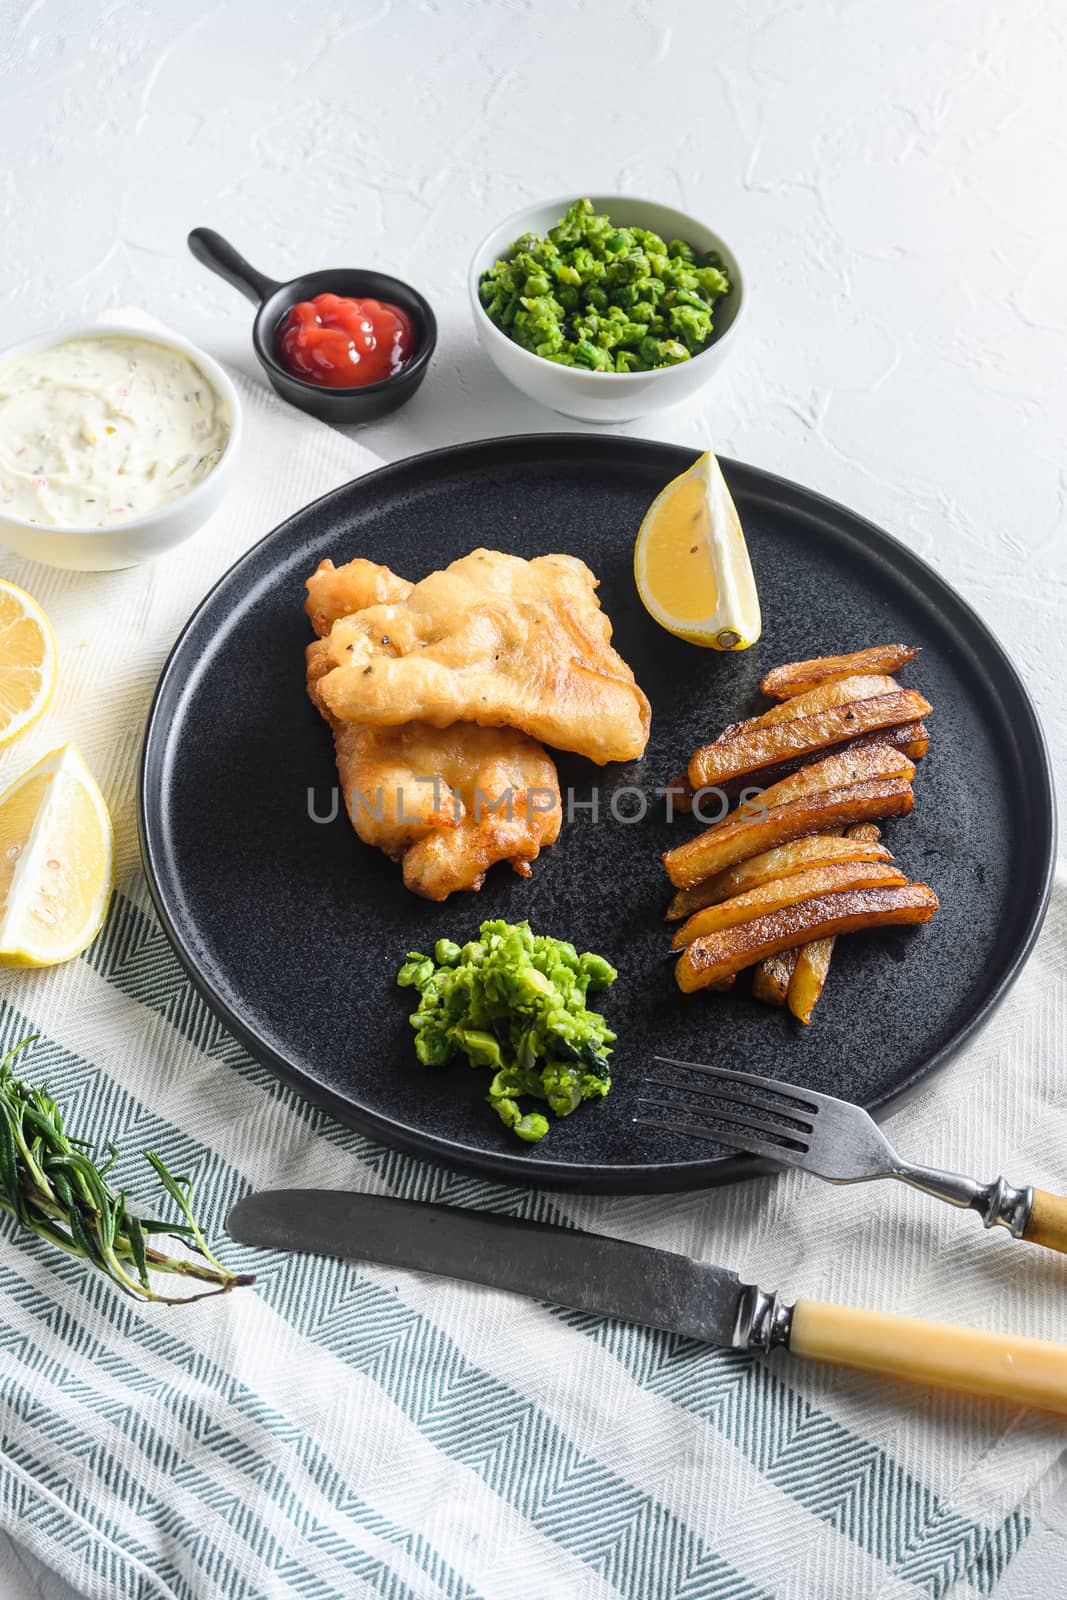 crispy fish and chips with battered cod and fries and a side of tartar sauce and mushy peas on rustic white stone table side view close-up by Ilianesolenyi